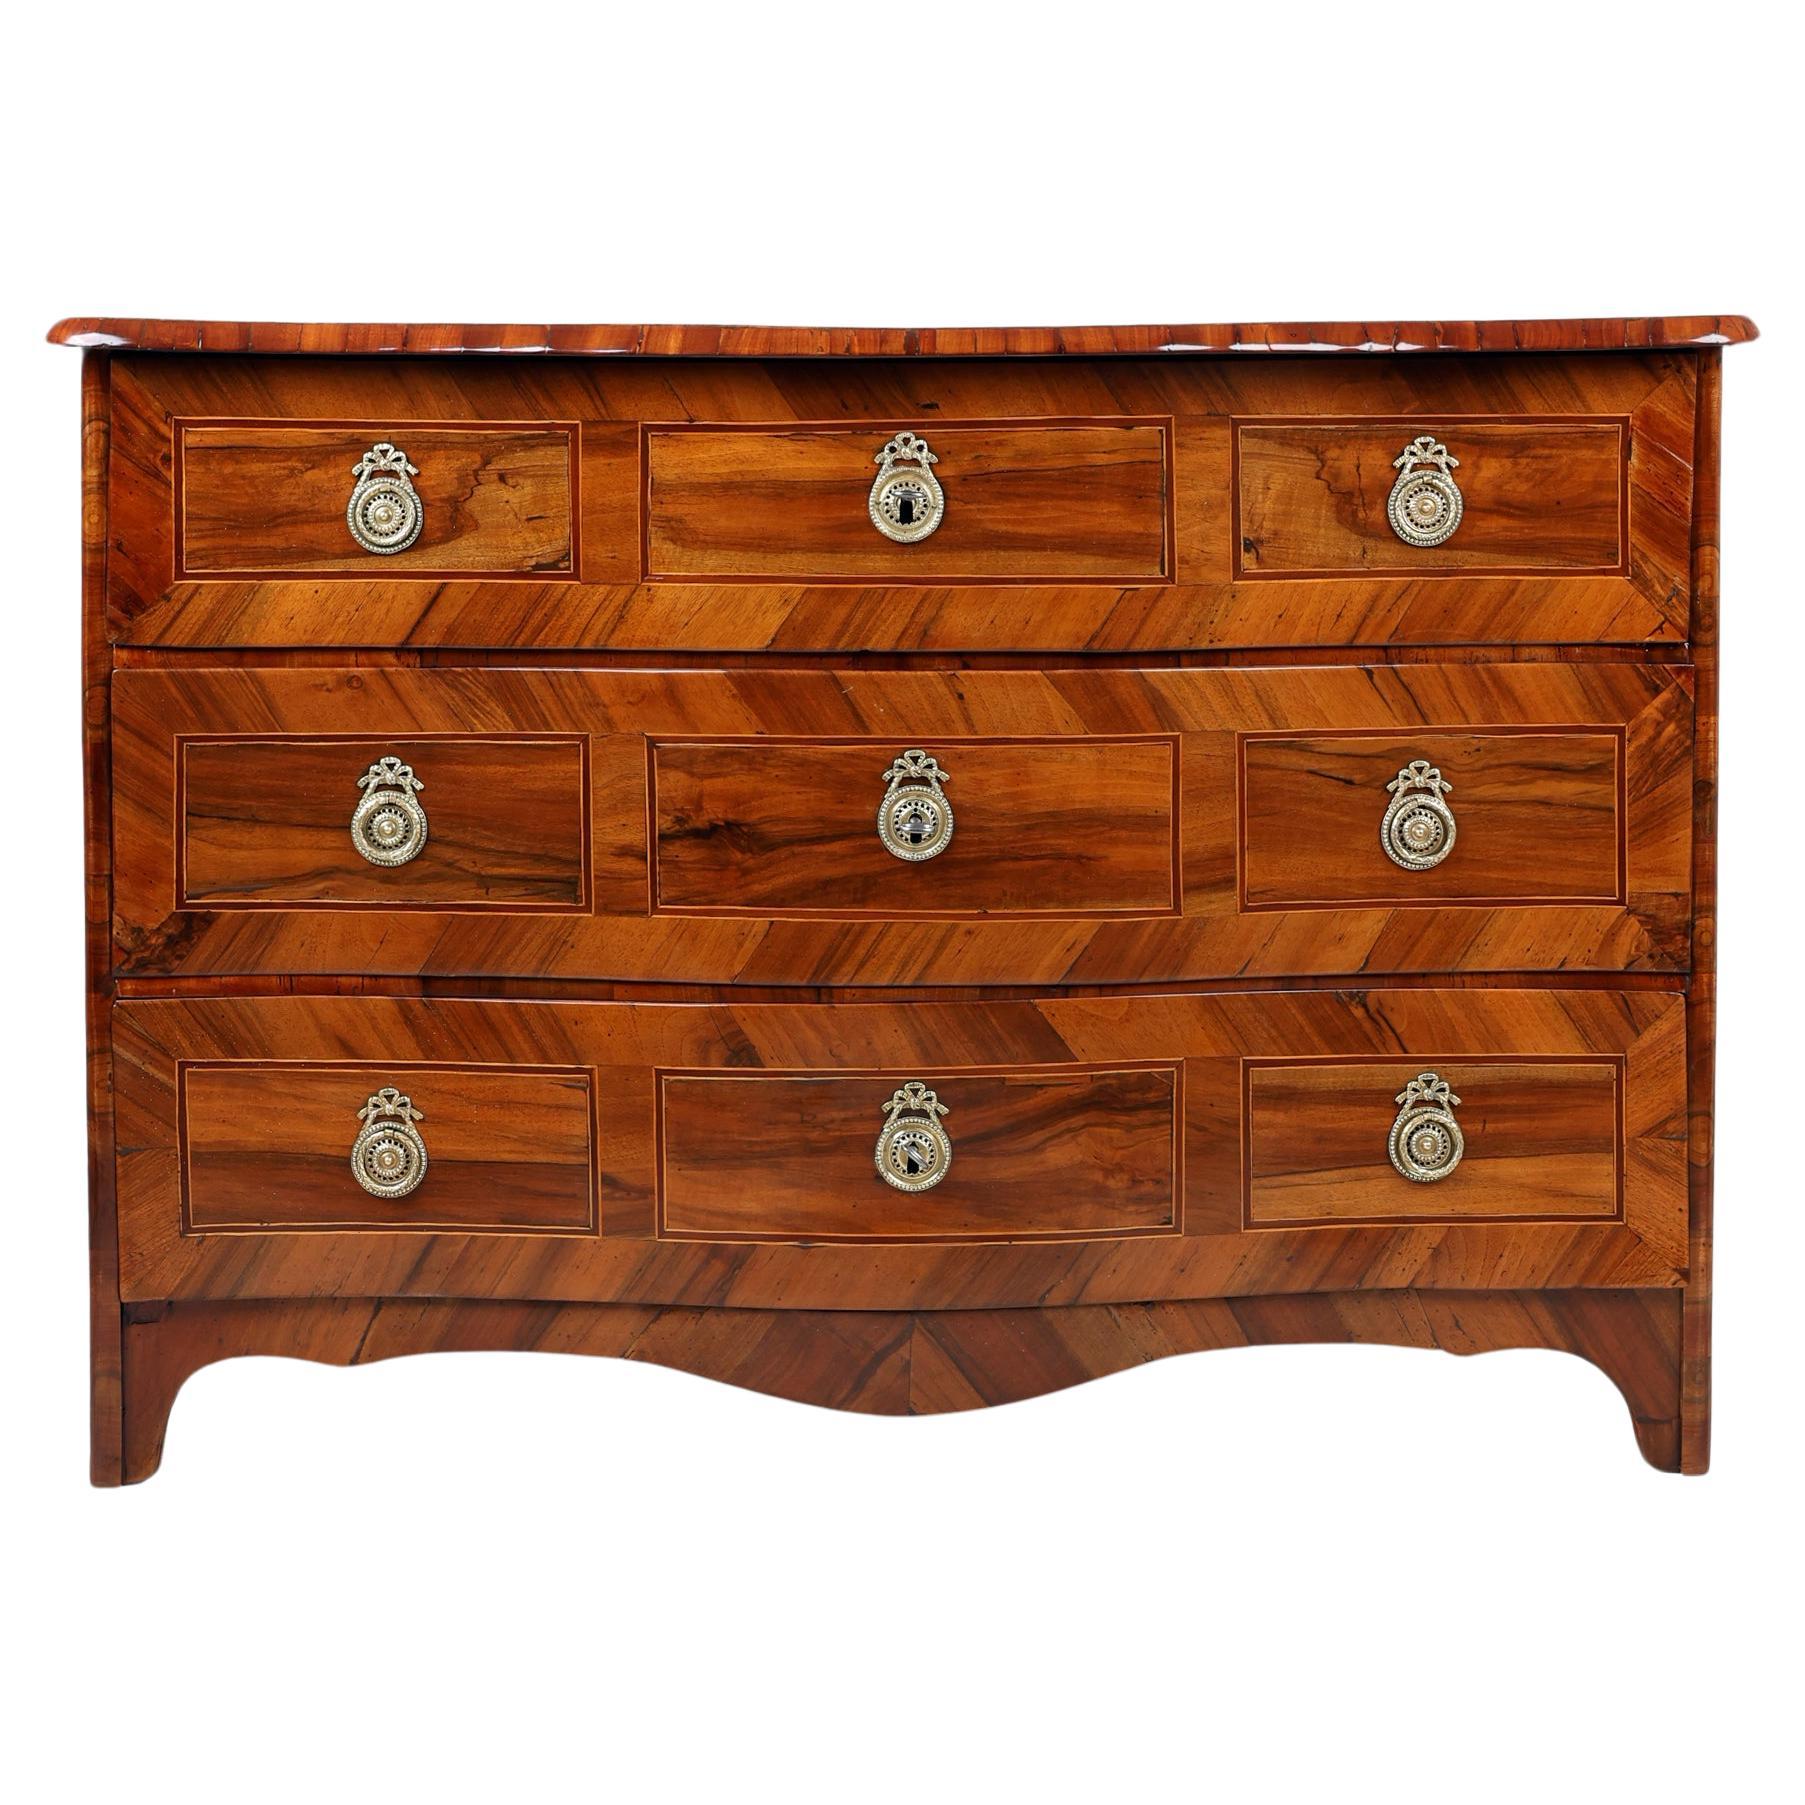 Early 19th Century Chest of Drawers from Louis XVI period,
1800 Germany,

This Louis Seize walnut chest of drawers is a true masterpiece of craftsmanship. The chest of drawers was manufactured before 1800 and is therefore a valuable antique piece of